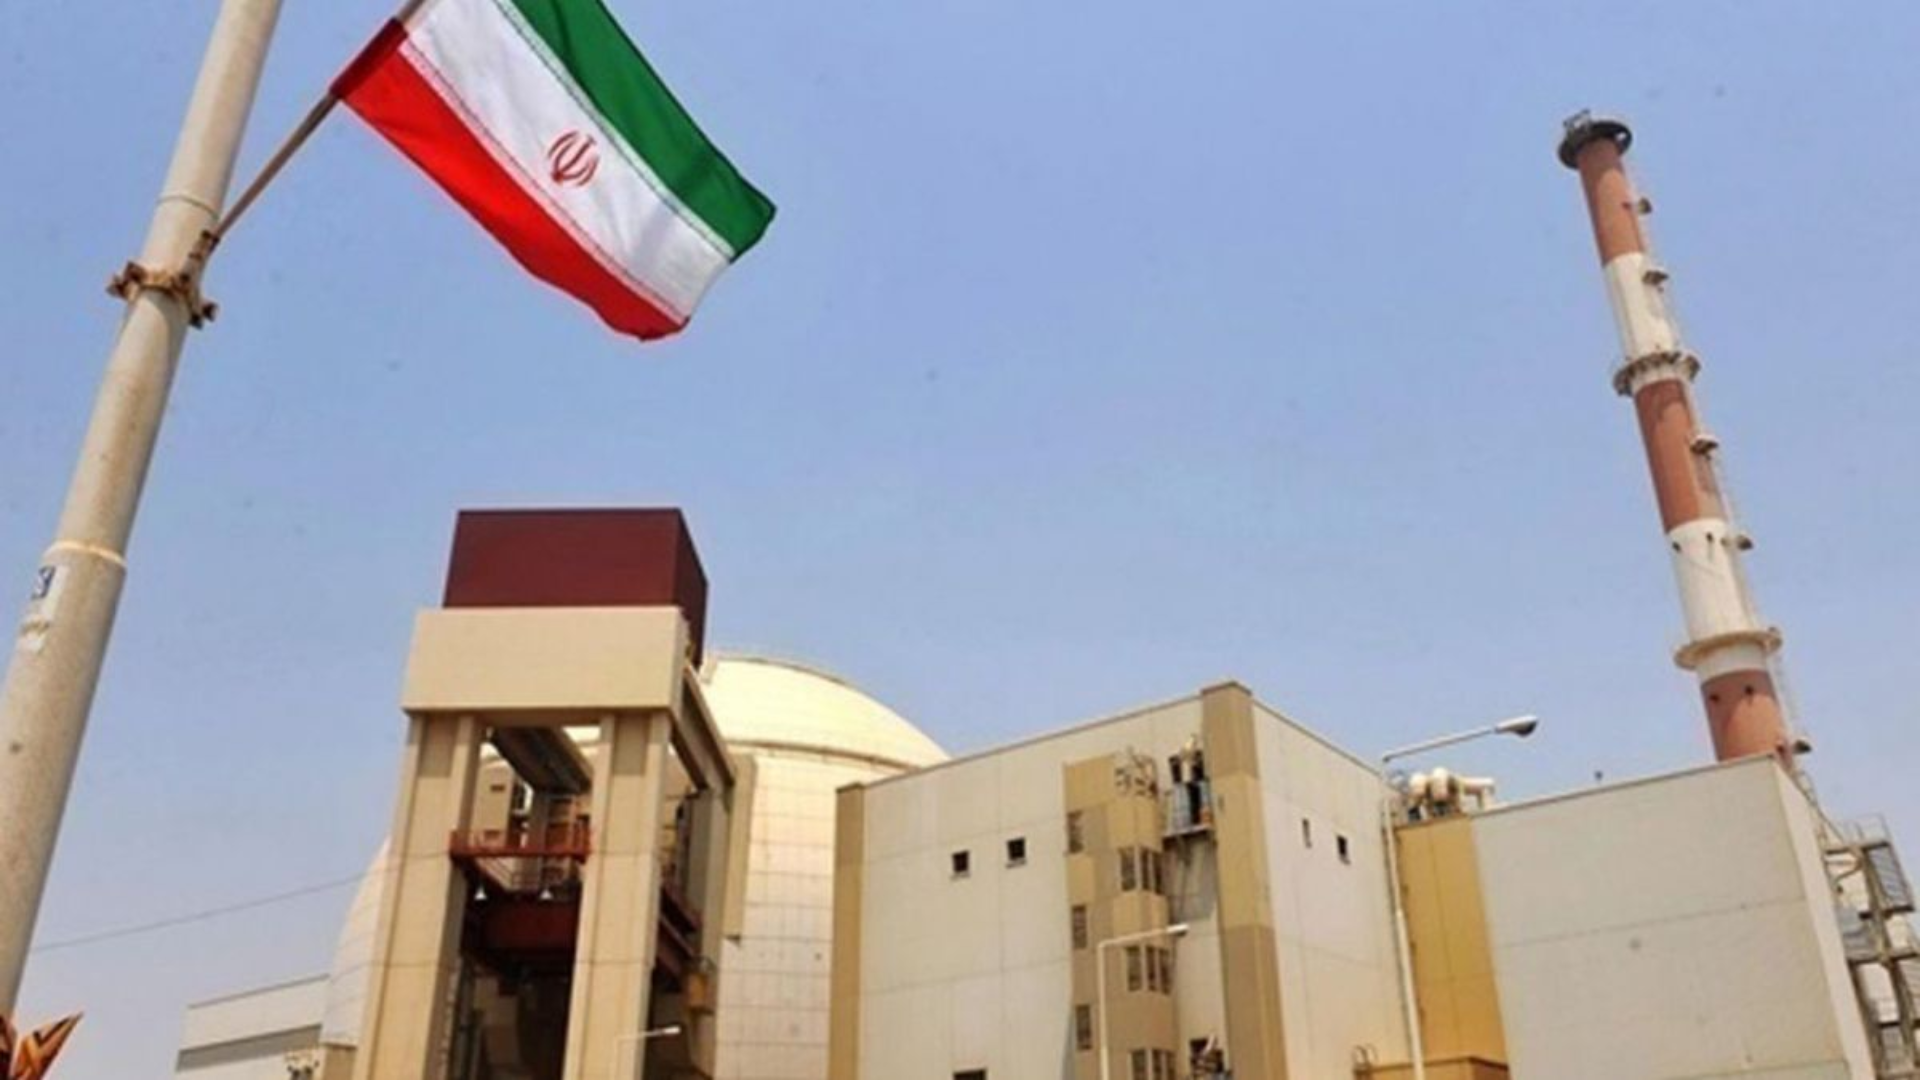 IAEA Iran's nuclear sites unharmed after Israel's reported strikes